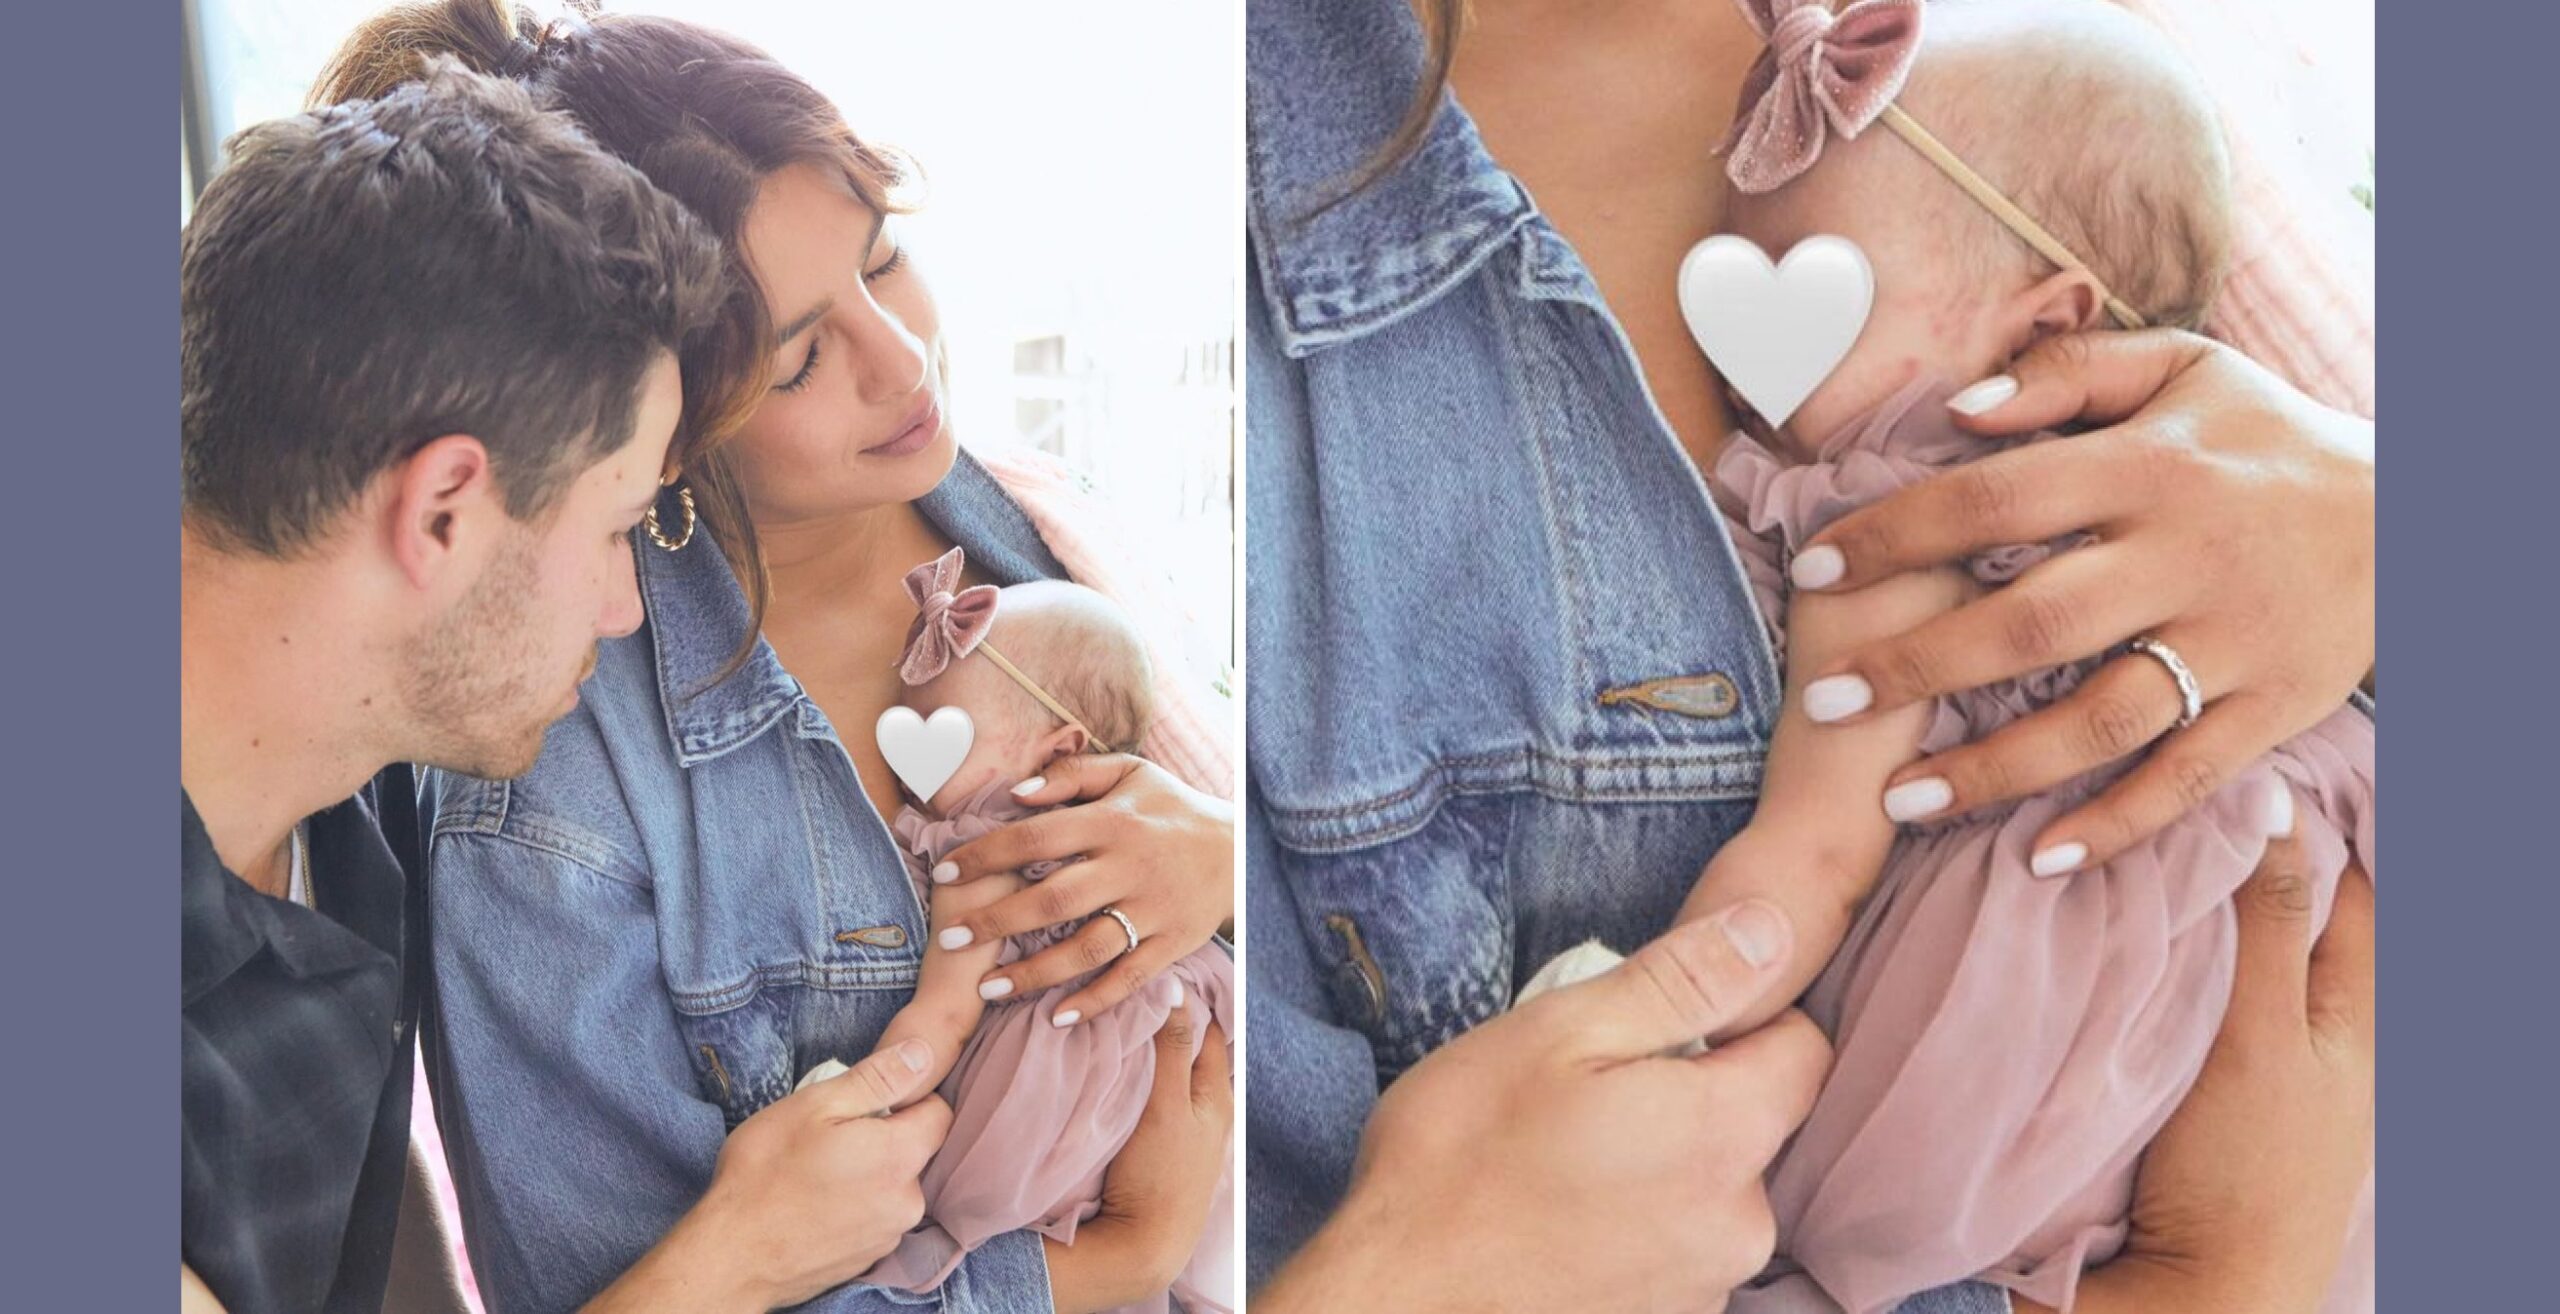 Priyanka Chopra Shares First Picture Of Baby Daughter, Reveals She Spent “100 plus days in the NICU”